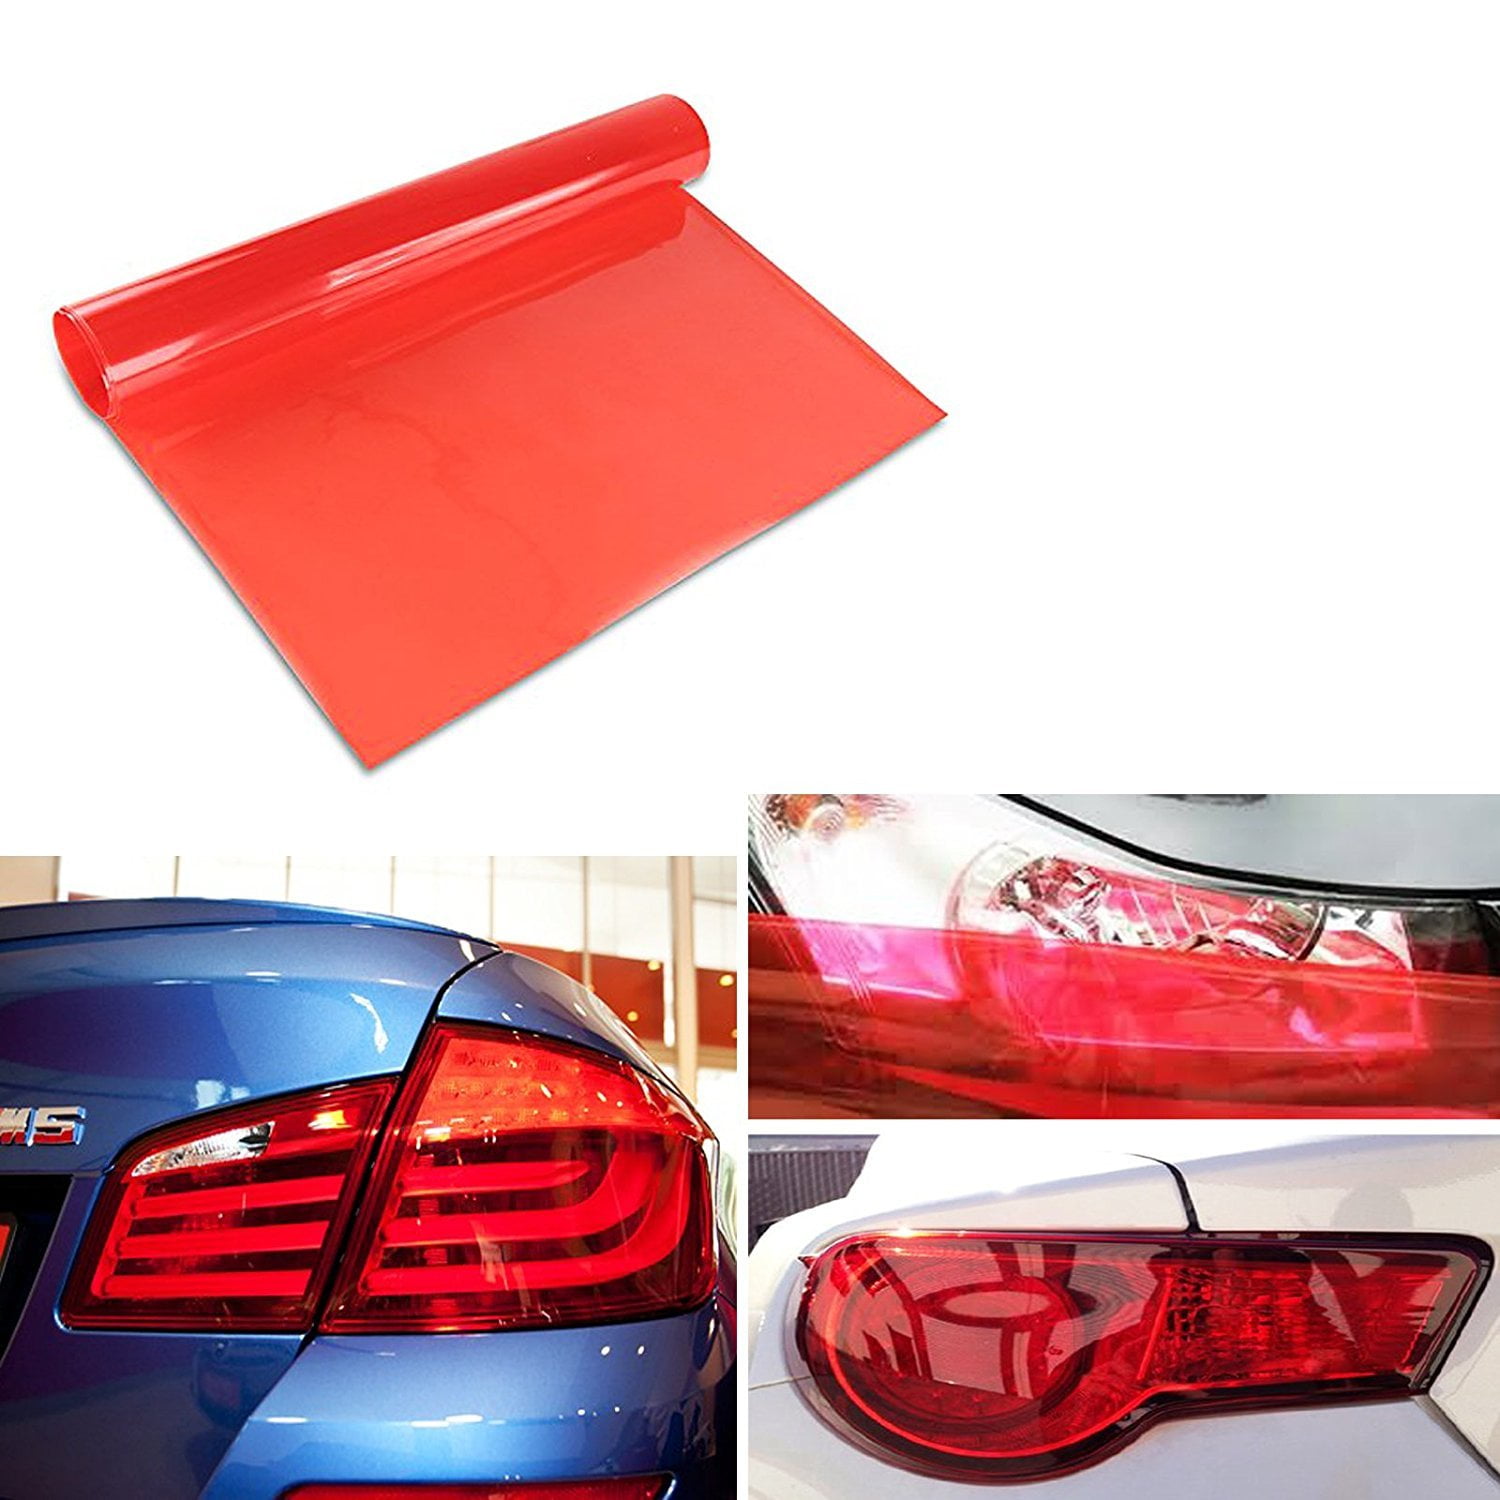 12/" x 48/" Red Tint Vinyl Film Wrap Sheet for Cadillac Tail Light Backup Lights